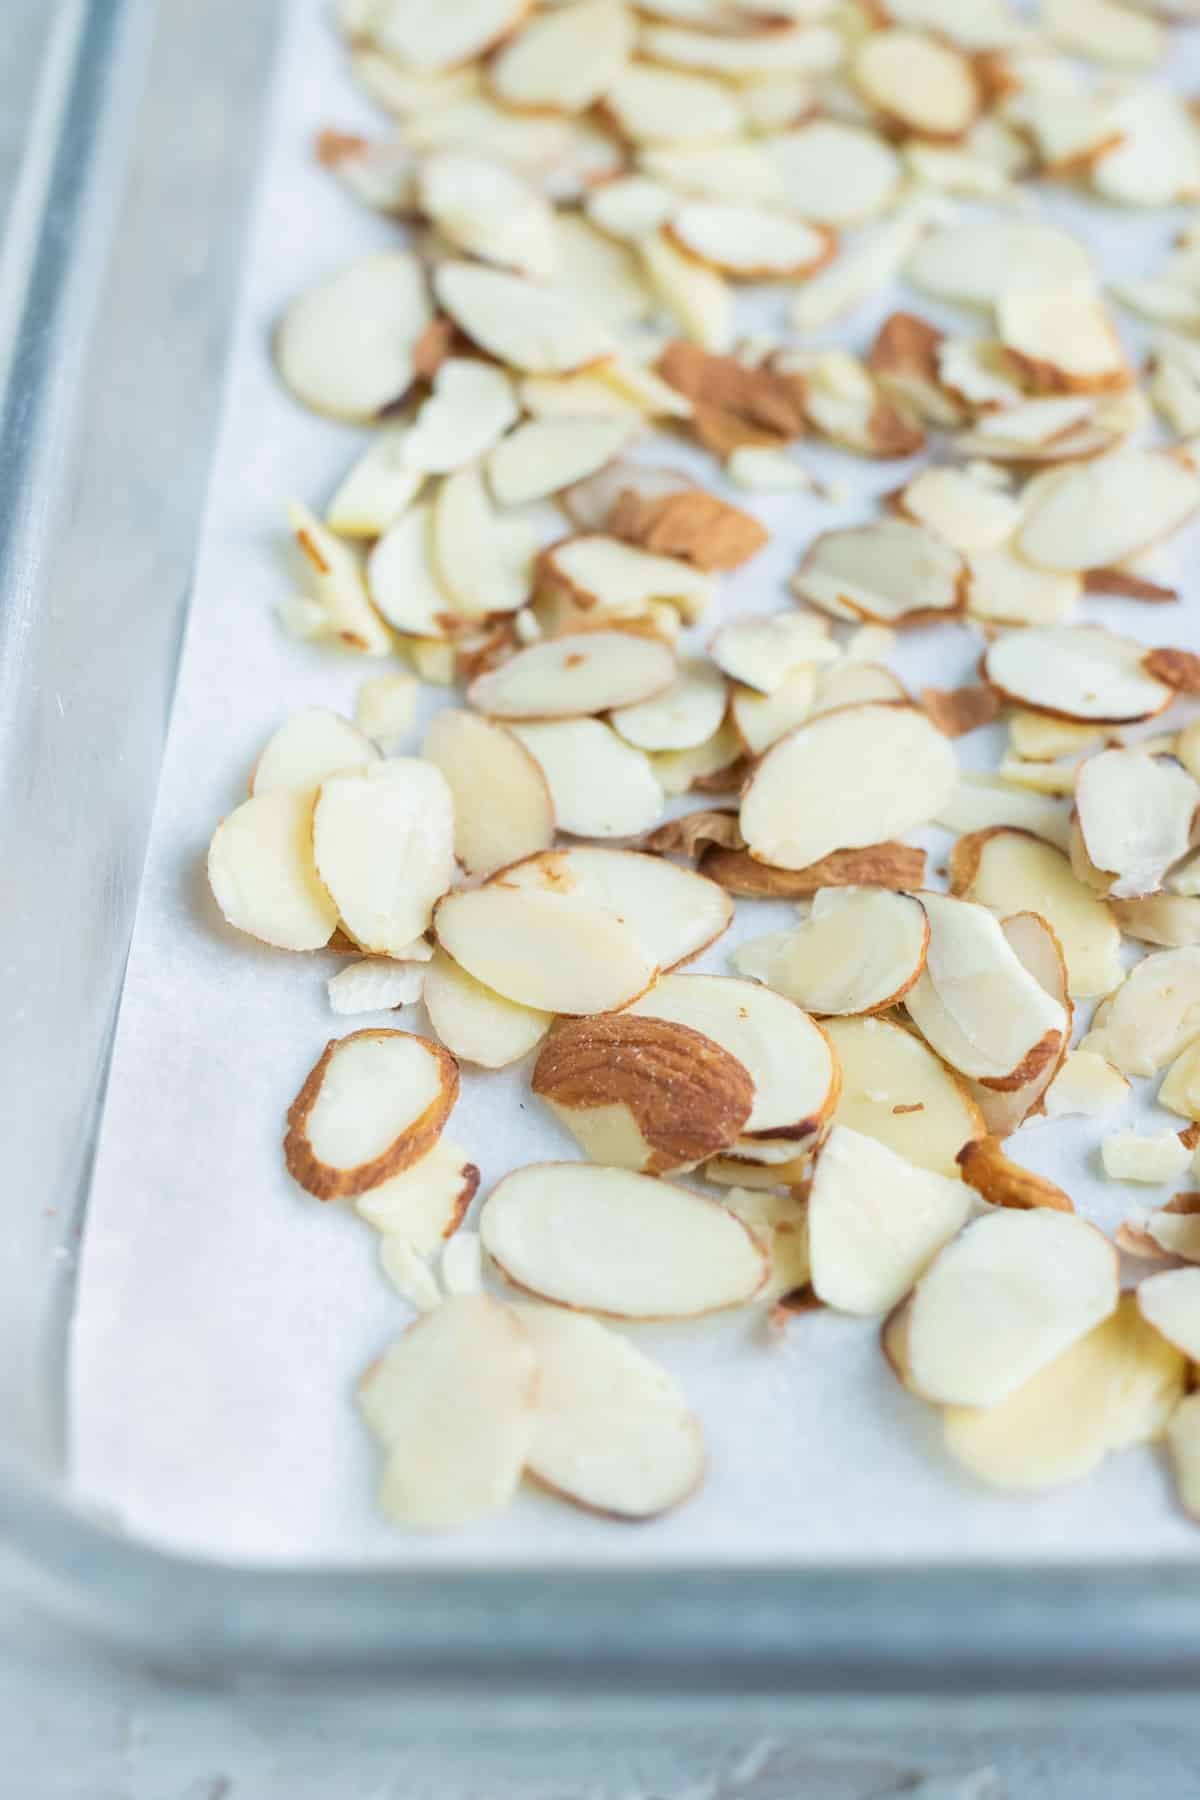 Sliced almonds are spread out on a sheet pan evenly before roasting.